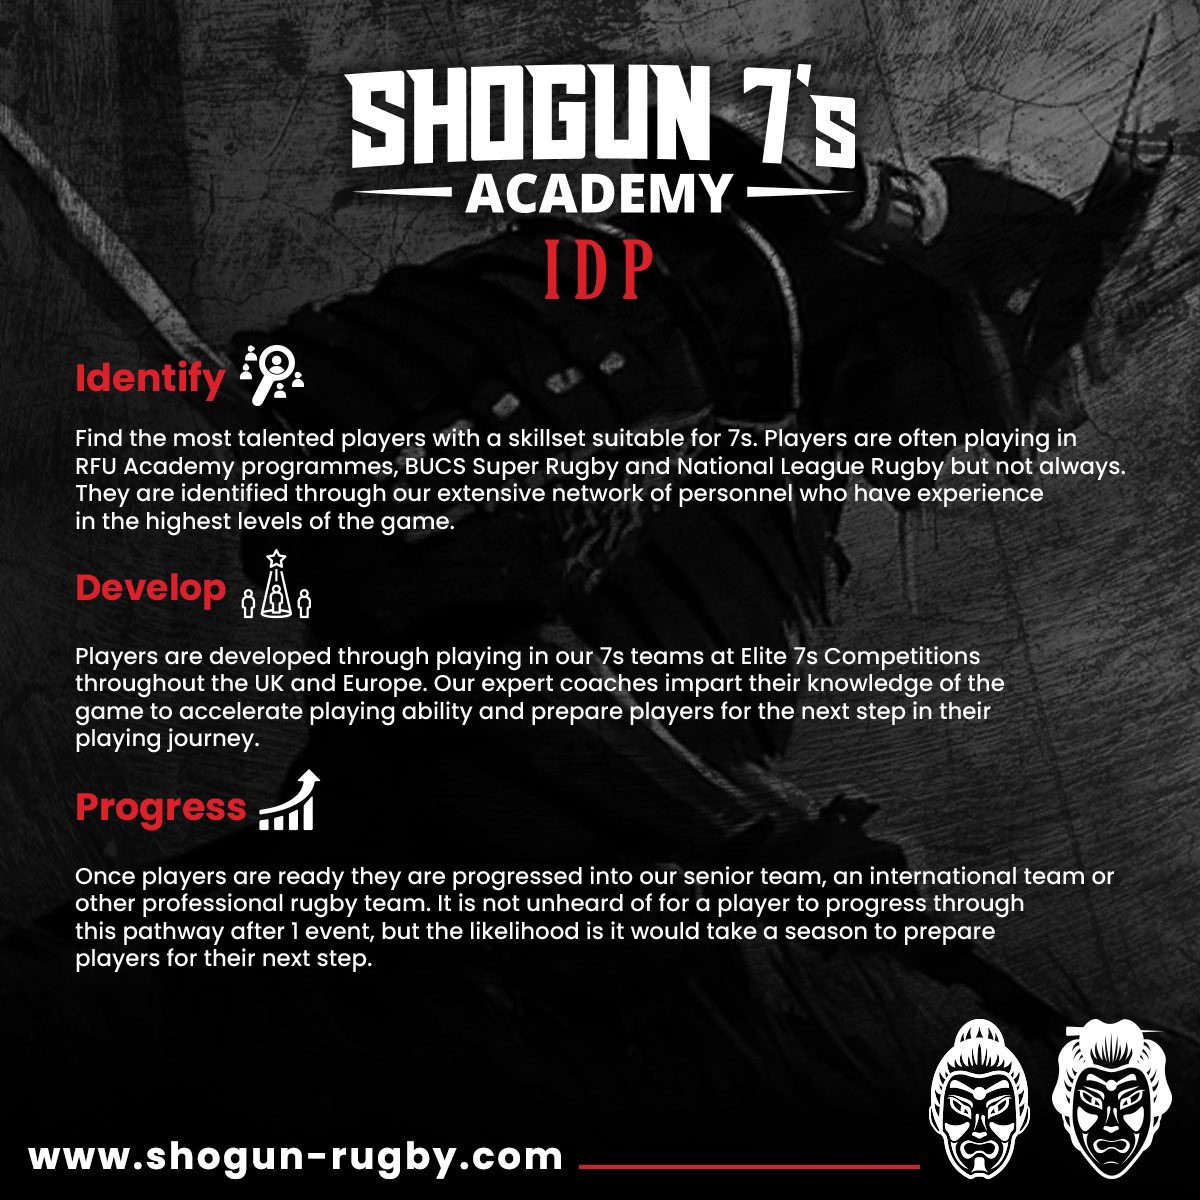 Shogun Rugby are pleased to announce the continuation of Allen Boyd as our Academy Director.He is currently Head of PE & Head of Rugby at Wirral Grammar School for Boys.Away from school he has been involved in talent identification for the IRFU through the Irish Exiles 7s program